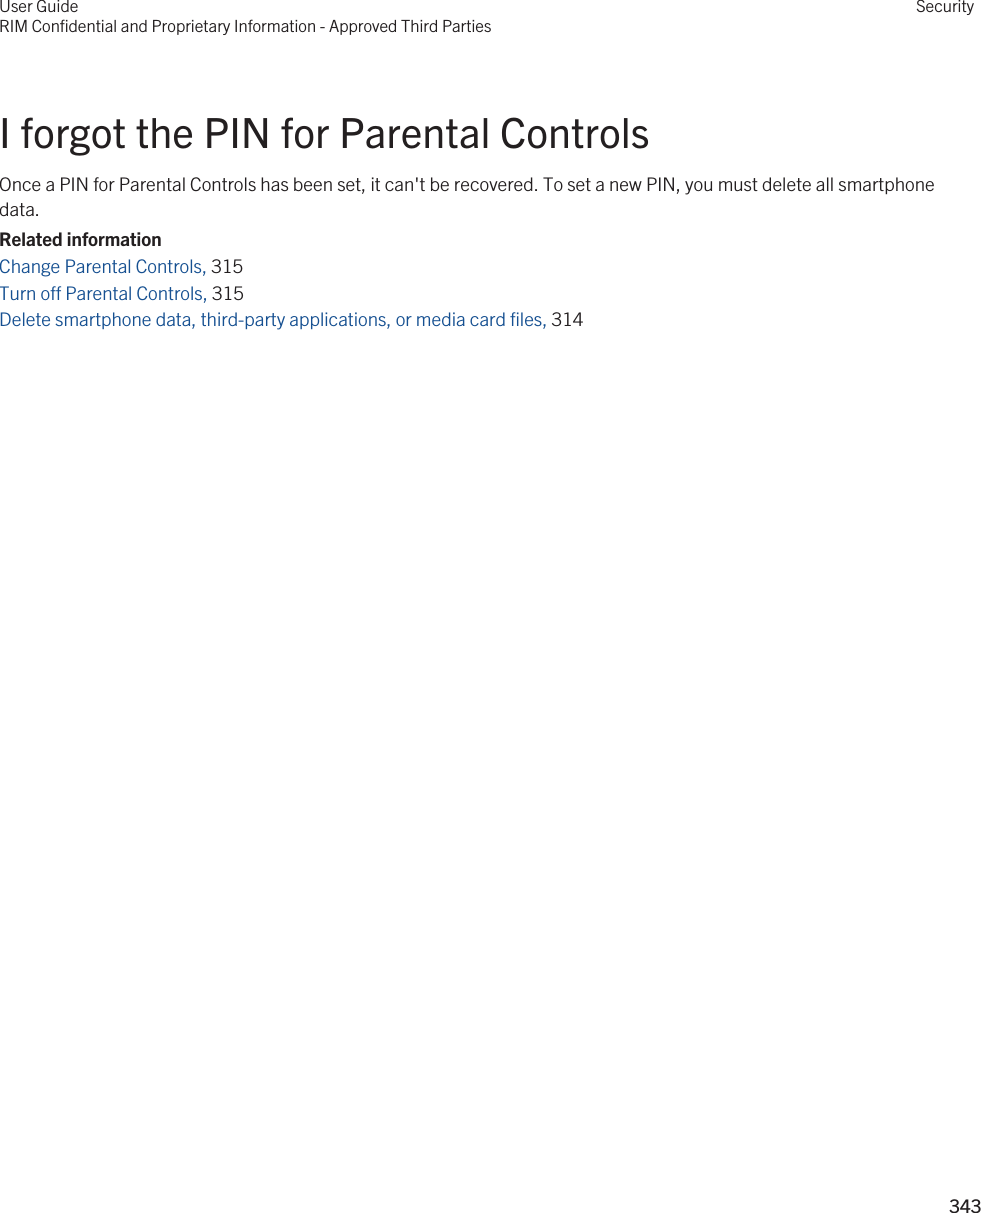 I forgot the PIN for Parental ControlsOnce a PIN for Parental Controls has been set, it can&apos;t be recovered. To set a new PIN, you must delete all smartphone data.Related informationChange Parental Controls, 315 Turn off Parental Controls, 315 Delete smartphone data, third-party applications, or media card files, 314 User GuideRIM Confidential and Proprietary Information - Approved Third PartiesSecurity343 